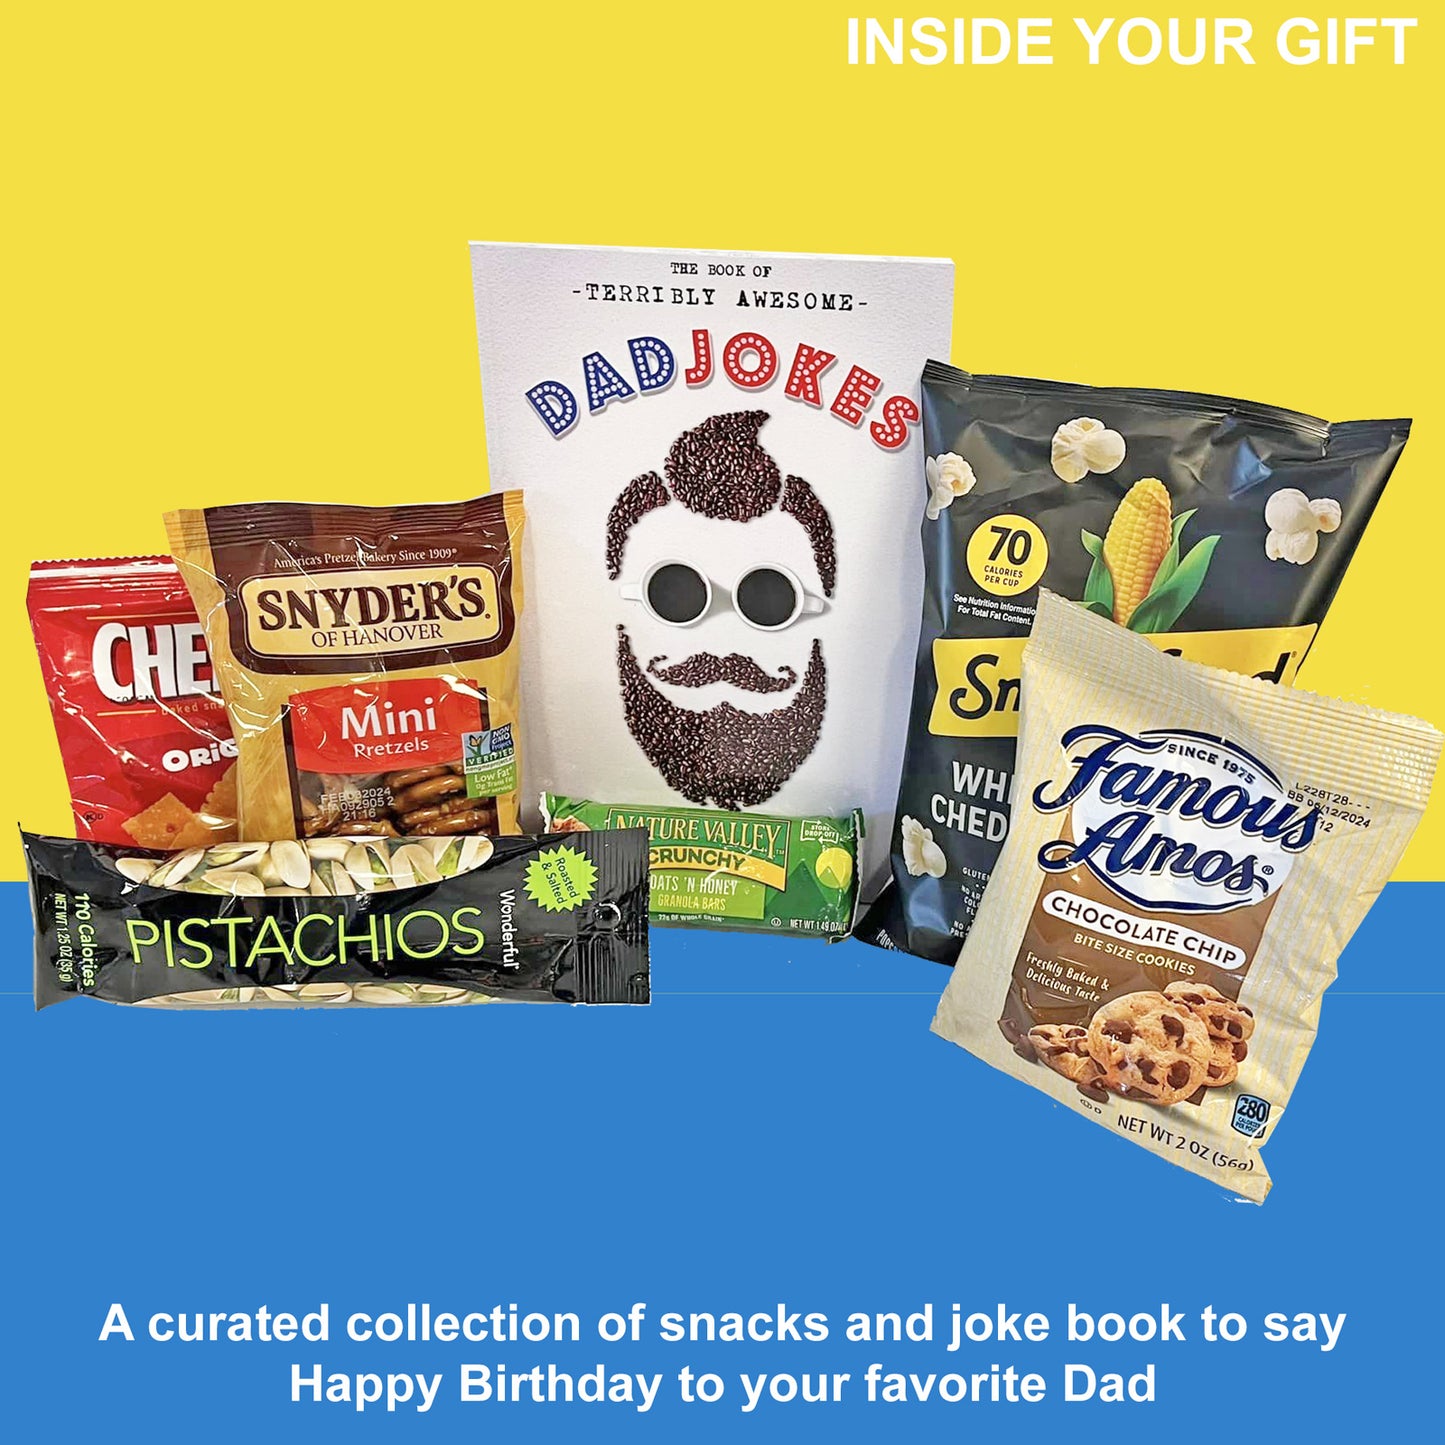 Dad Jokes Birthday Gift Box for Men Funny Men’s Birthday Gift with Joke Book and Snacks for His Birthday has Popcorn, Pretzels and Cookies for His Birthday Celebration